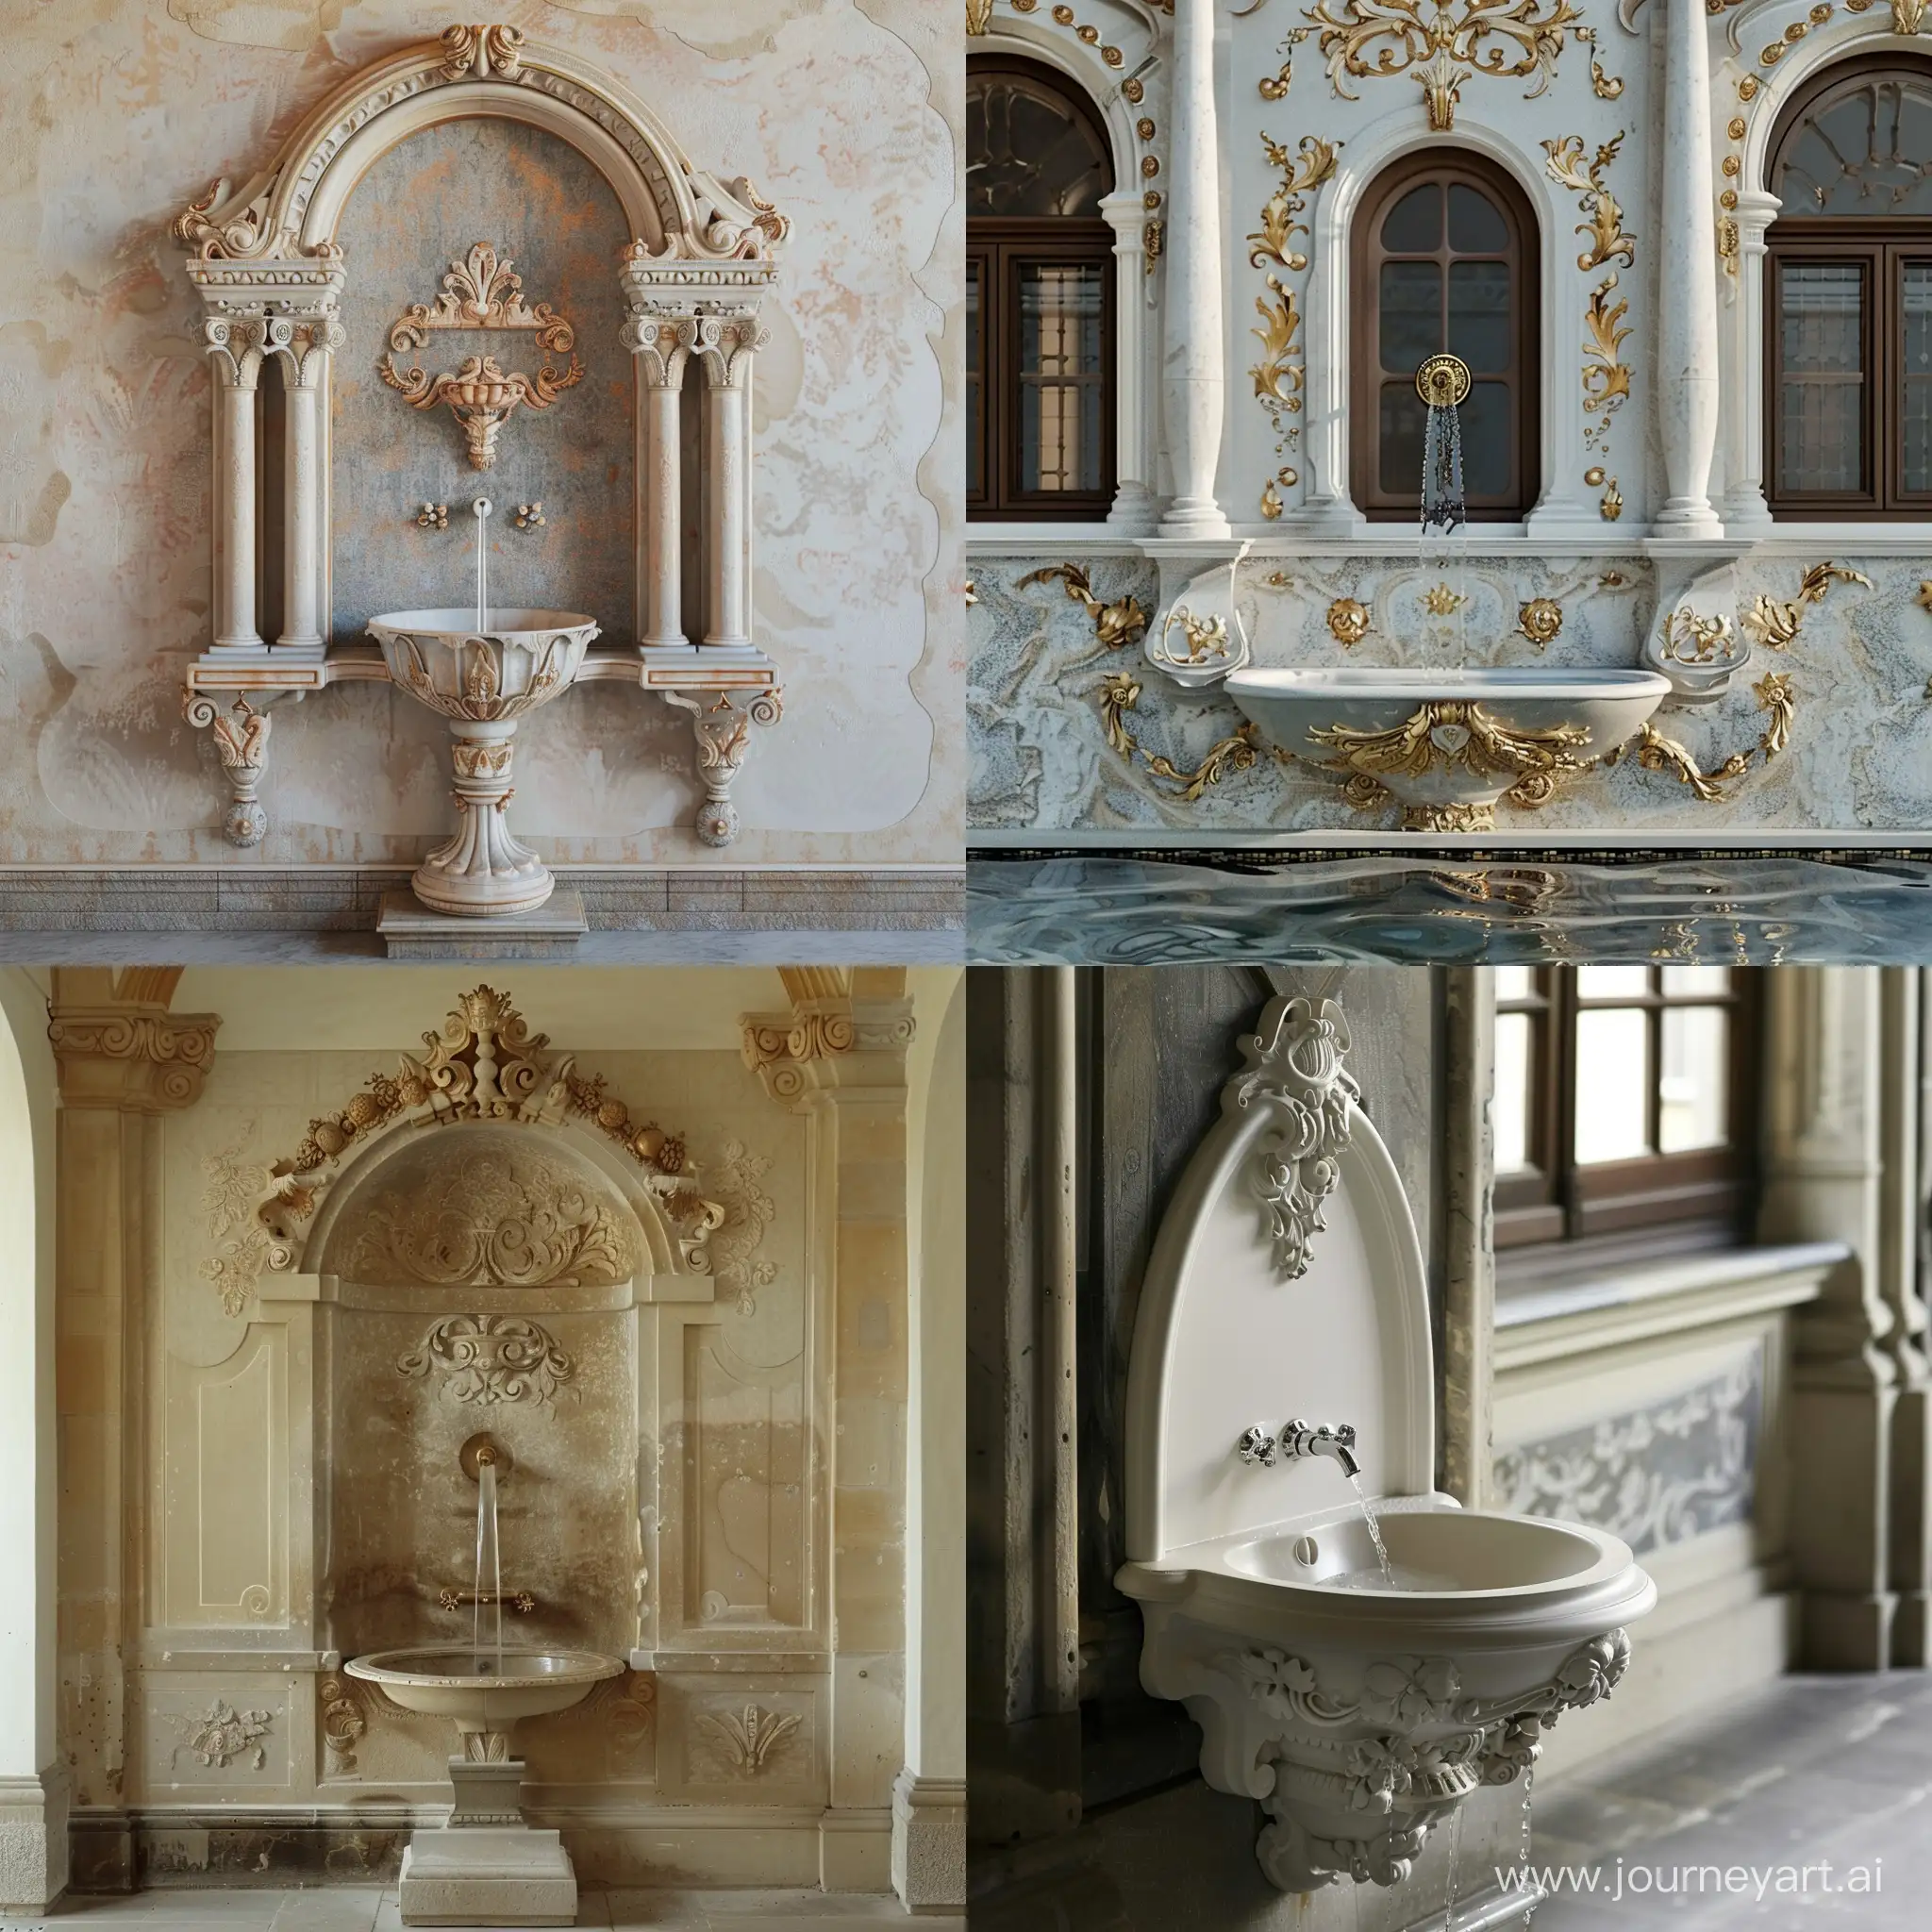 Baroque-Fountain-and-WallMounted-Sink-Ornate-Architectural-Elegance